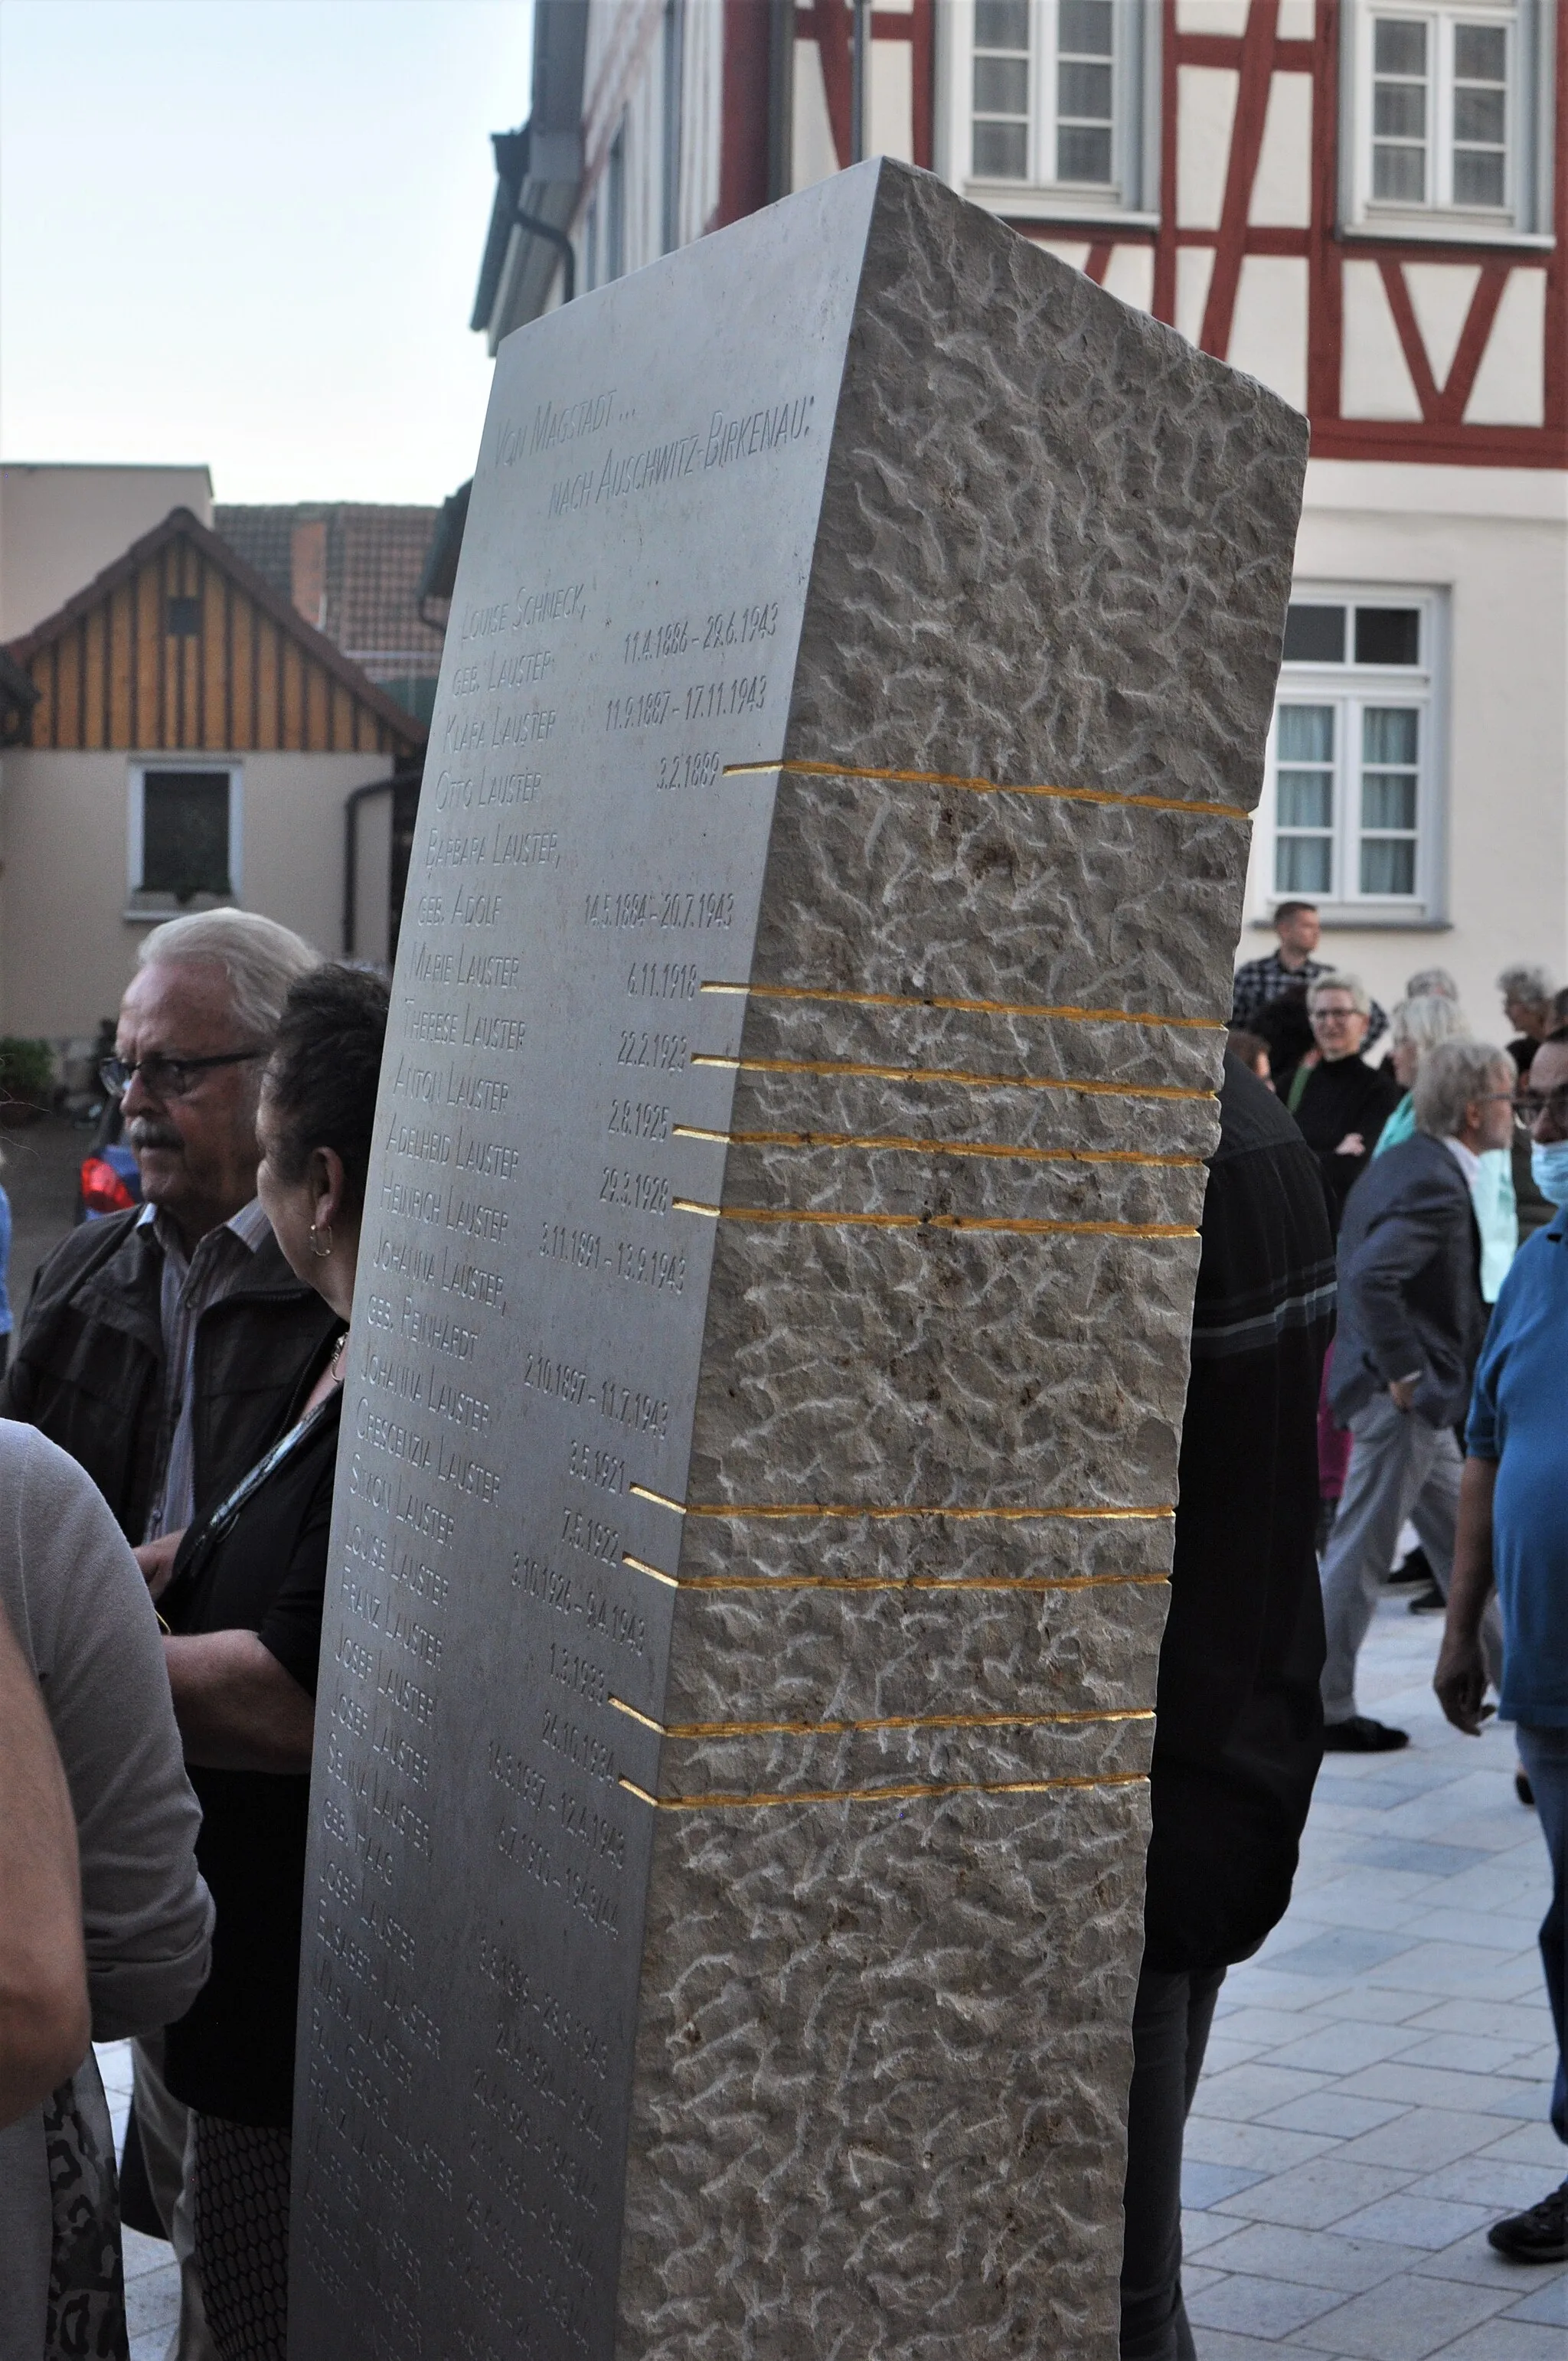 Photo showing: A stele of the memorial in Magstadt in memory of the Sinti deported to Auschwitz-Birkenau, shortly after the unveiling on 24 September 2021, photo: Manuel Werner